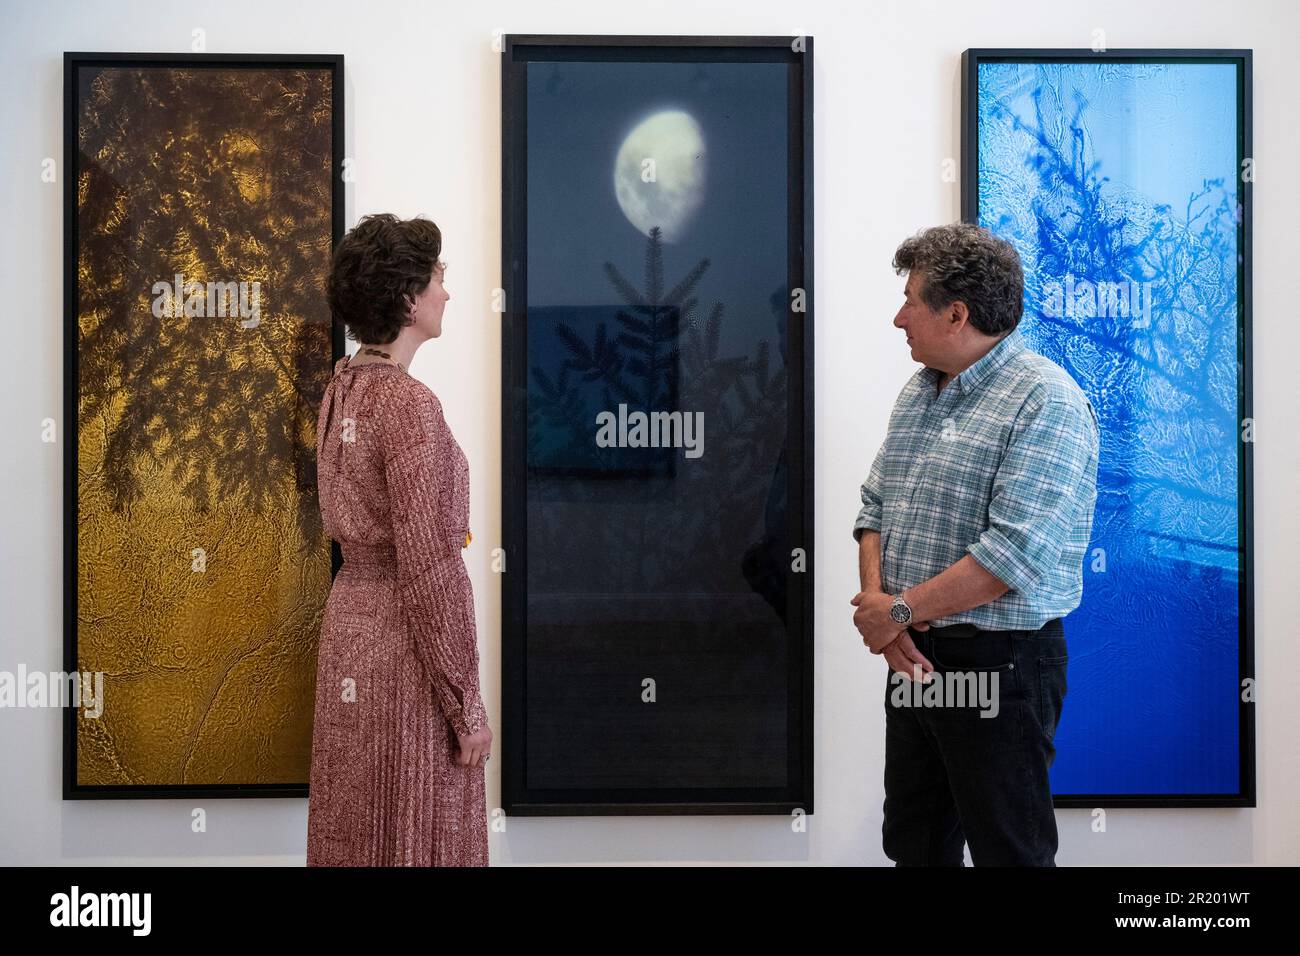 London, UK.  16 May 2023.  Ex-Director of Impressionist and Modern Art at Sotheby’s, Sophie Camu Lindsay and her husband and photographer, Alexander Lindsay, with 'River Taw The Streens, Gold Fir', 1998-2020, 'Half Moon Fir', 2003, and 'The Streens, Alder', 1998-2019 all by Susan Derges, at their first ‘Space to Breathe’ exhibition.  Works by four British artists are on show at Cromwell Place in South Kensington ahead of the main exhibition and festival, at Bowhouse, in the East Neuk of Fife, Scotland 15 July to 6 August 2023.    Credit: Stephen Chung / Alamy Live News Stock Photo